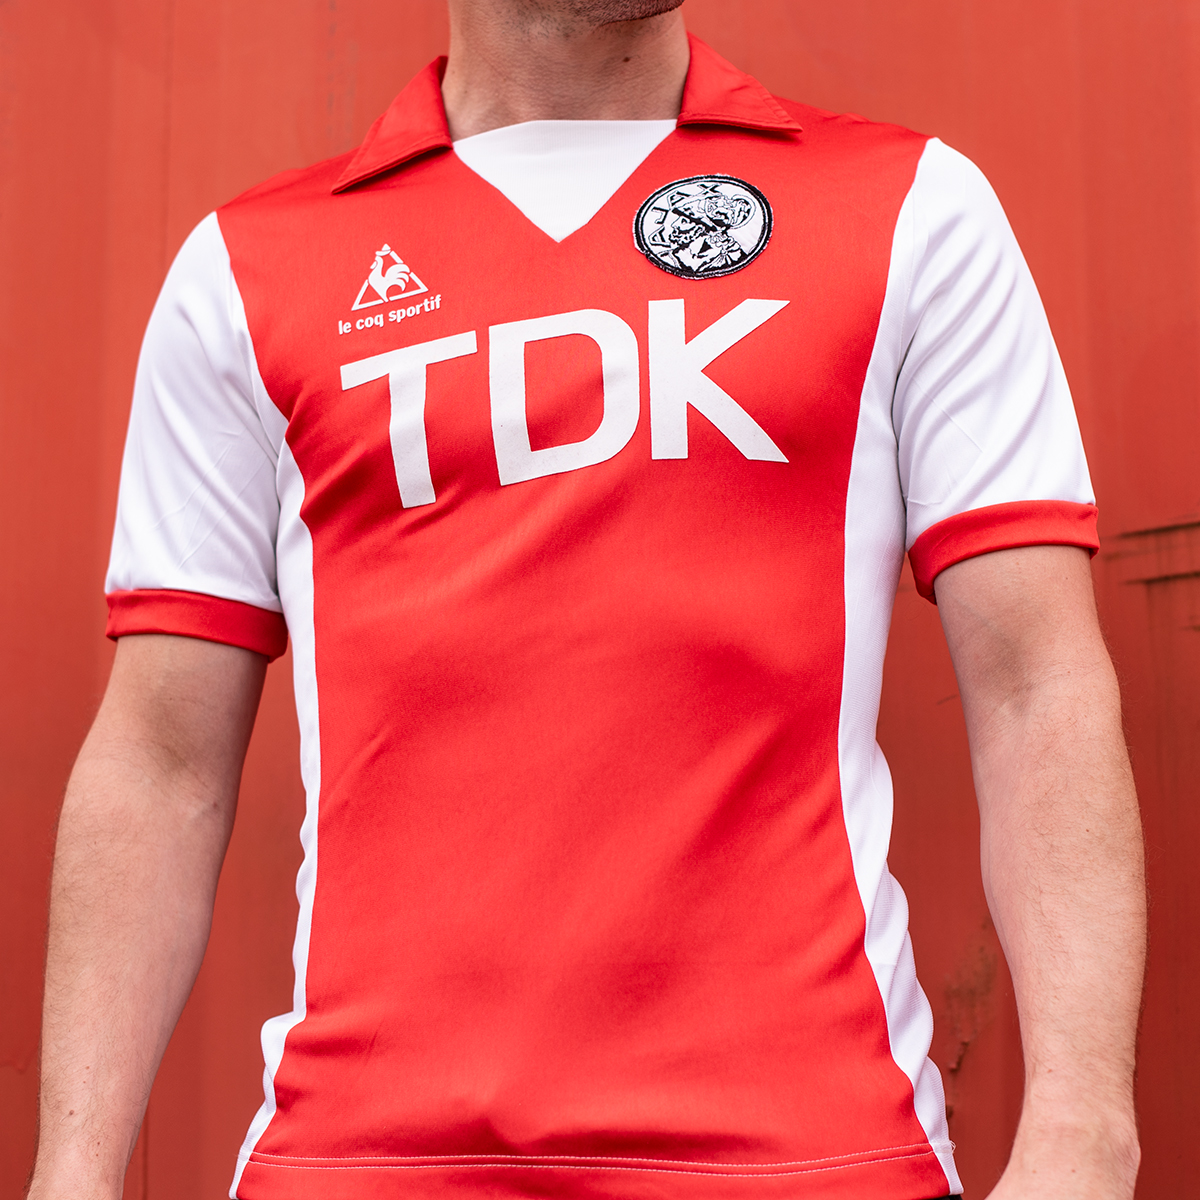 Classic Football Shirts on "Early 80s Ajax Home by Le Coq Sportif 🇳🇱 the site on May 11th! https://t.co/noRcZ4bcLz" / Twitter